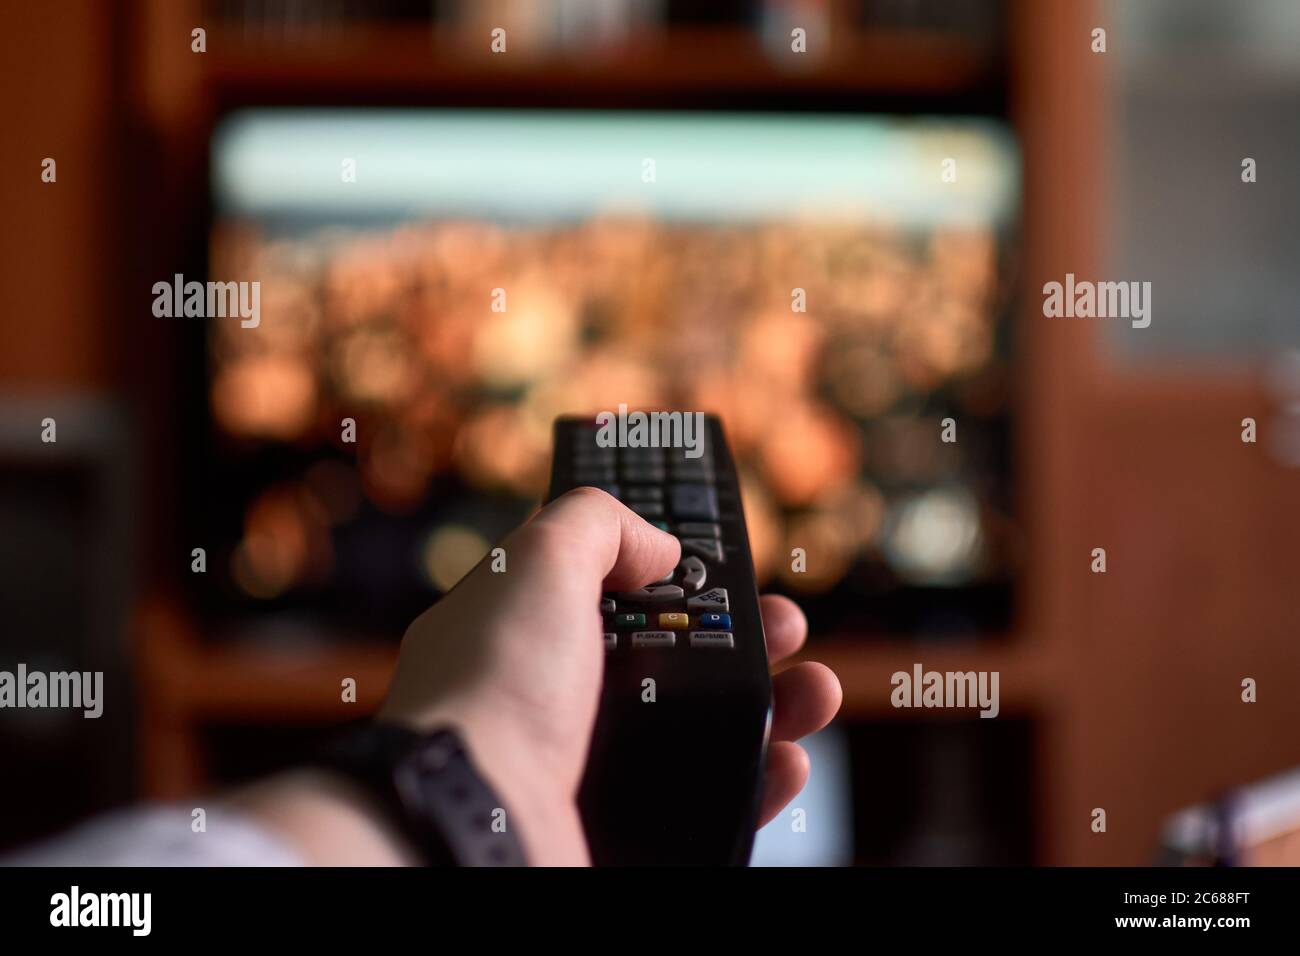 Close-up of a man changing channels with a remote control at home Stock Photo